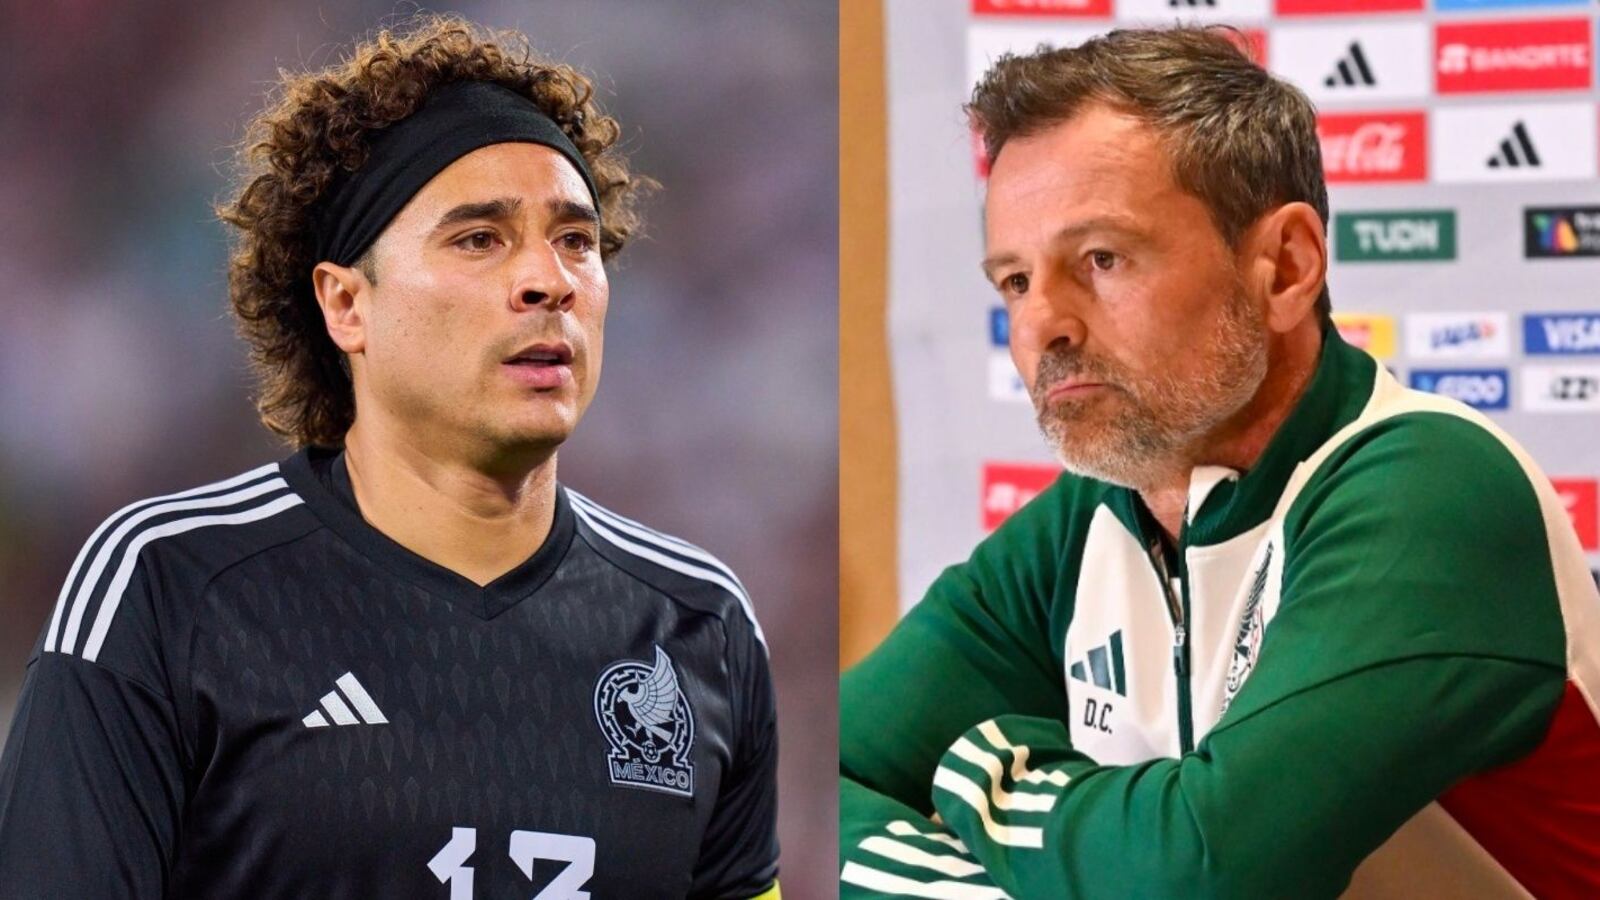 Hours before Memo Ochoa plays in Serie A, the worst news that Mexico gives him